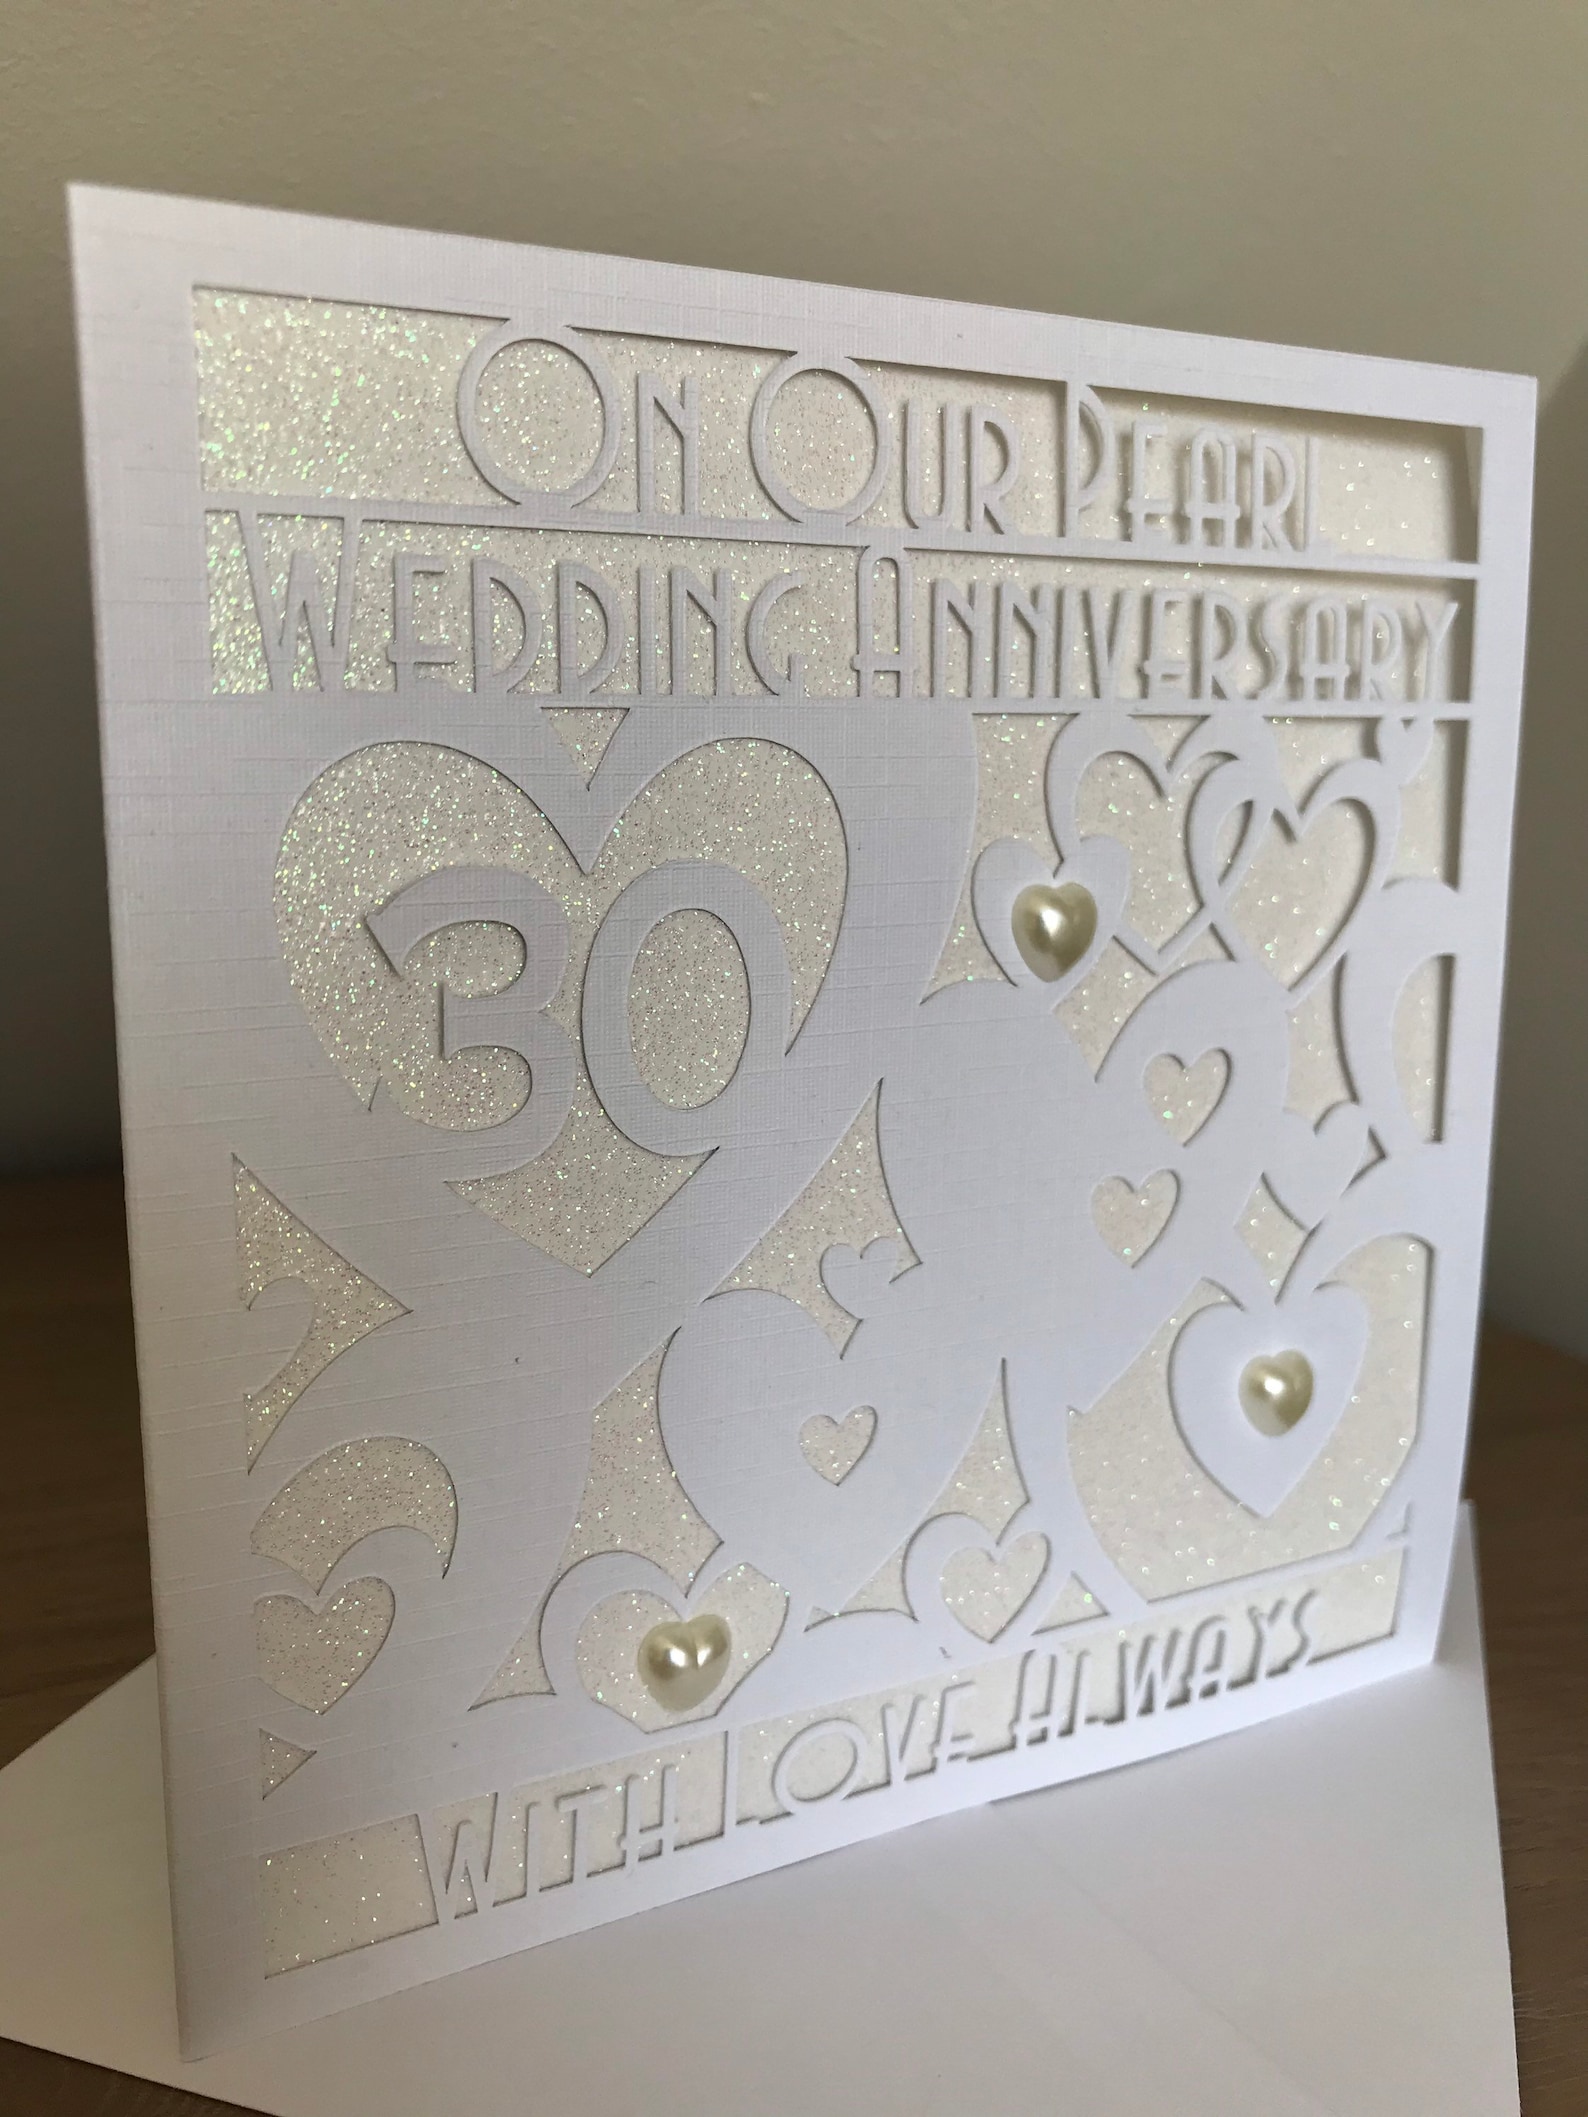 Our Pearl Wedding Anniversary Card 30th wife or husband | Etsy